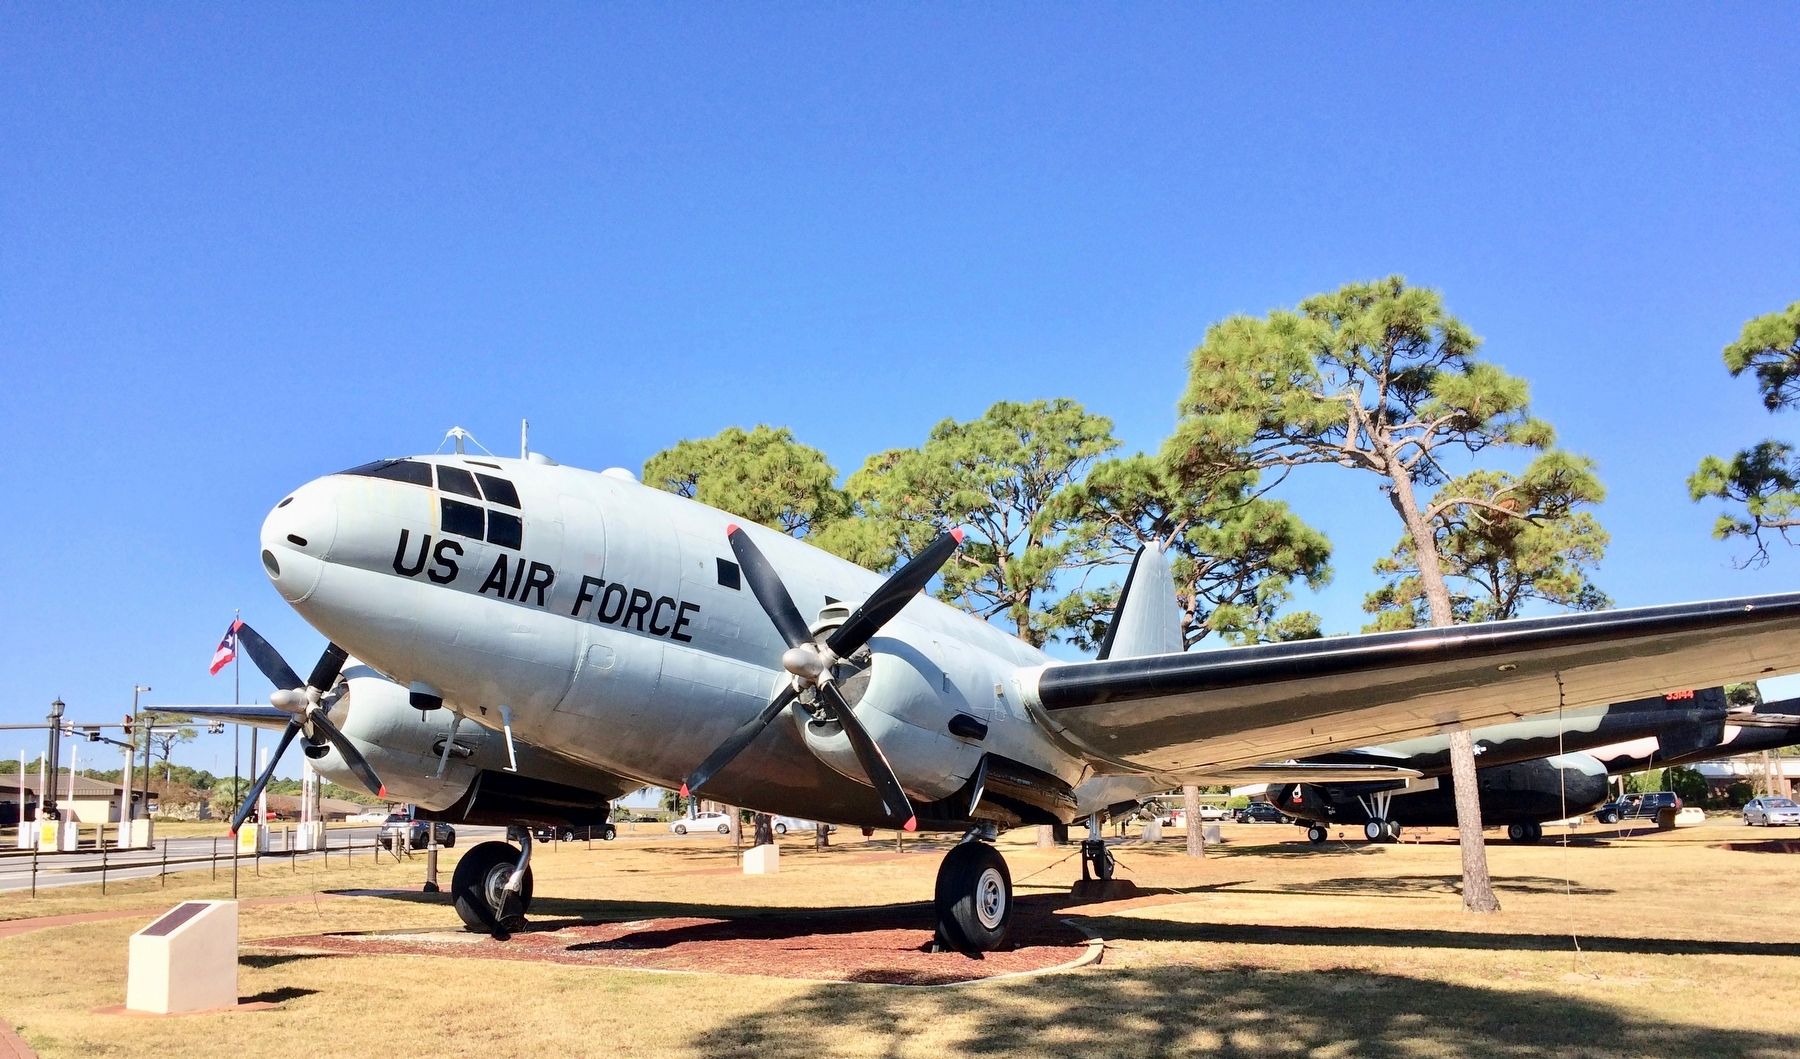 C-46 Commando aircraft. image. Click for full size.